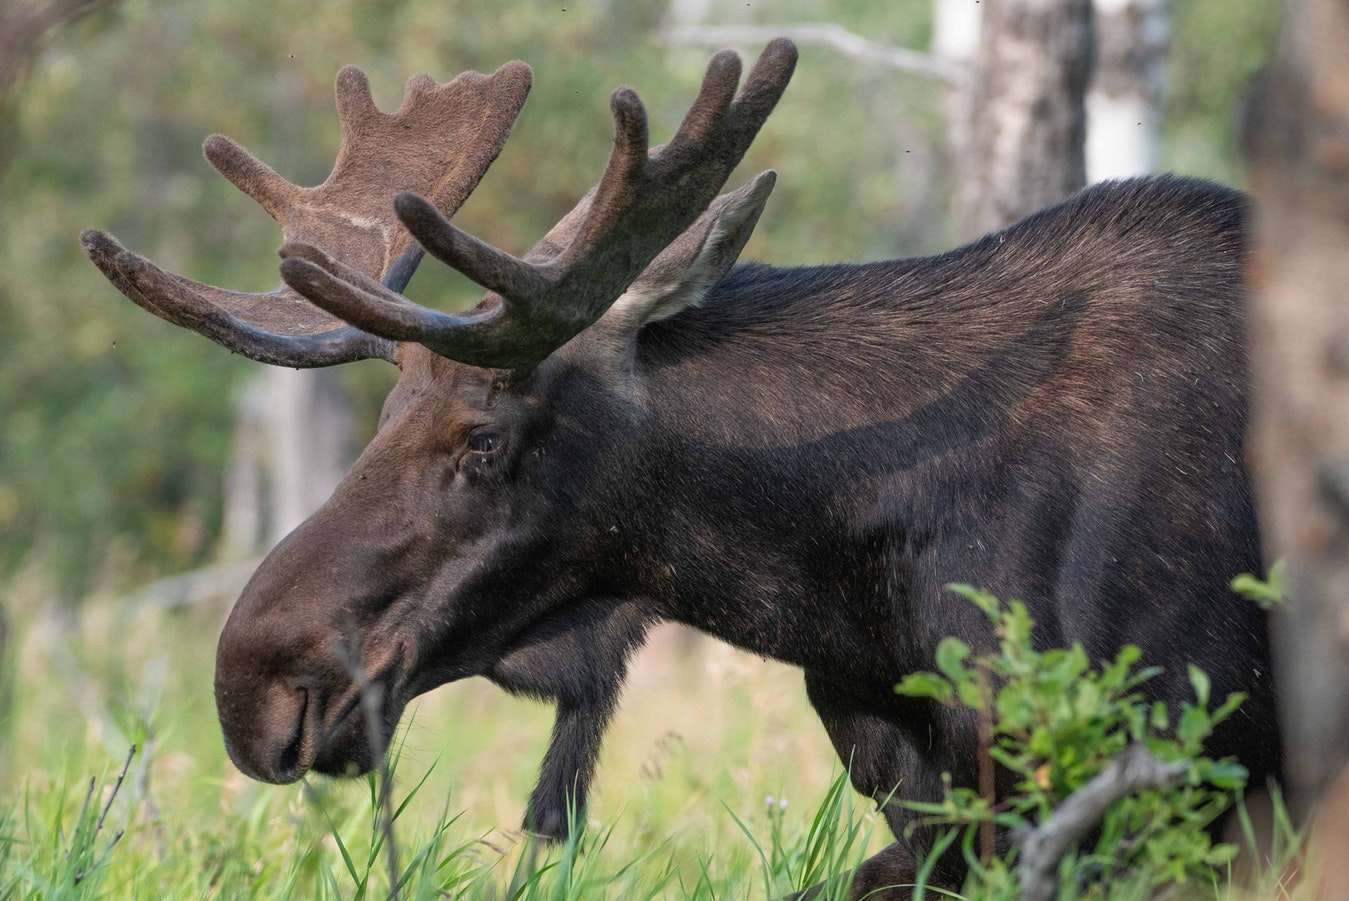 Brown moose crouching at the edge of the forest.